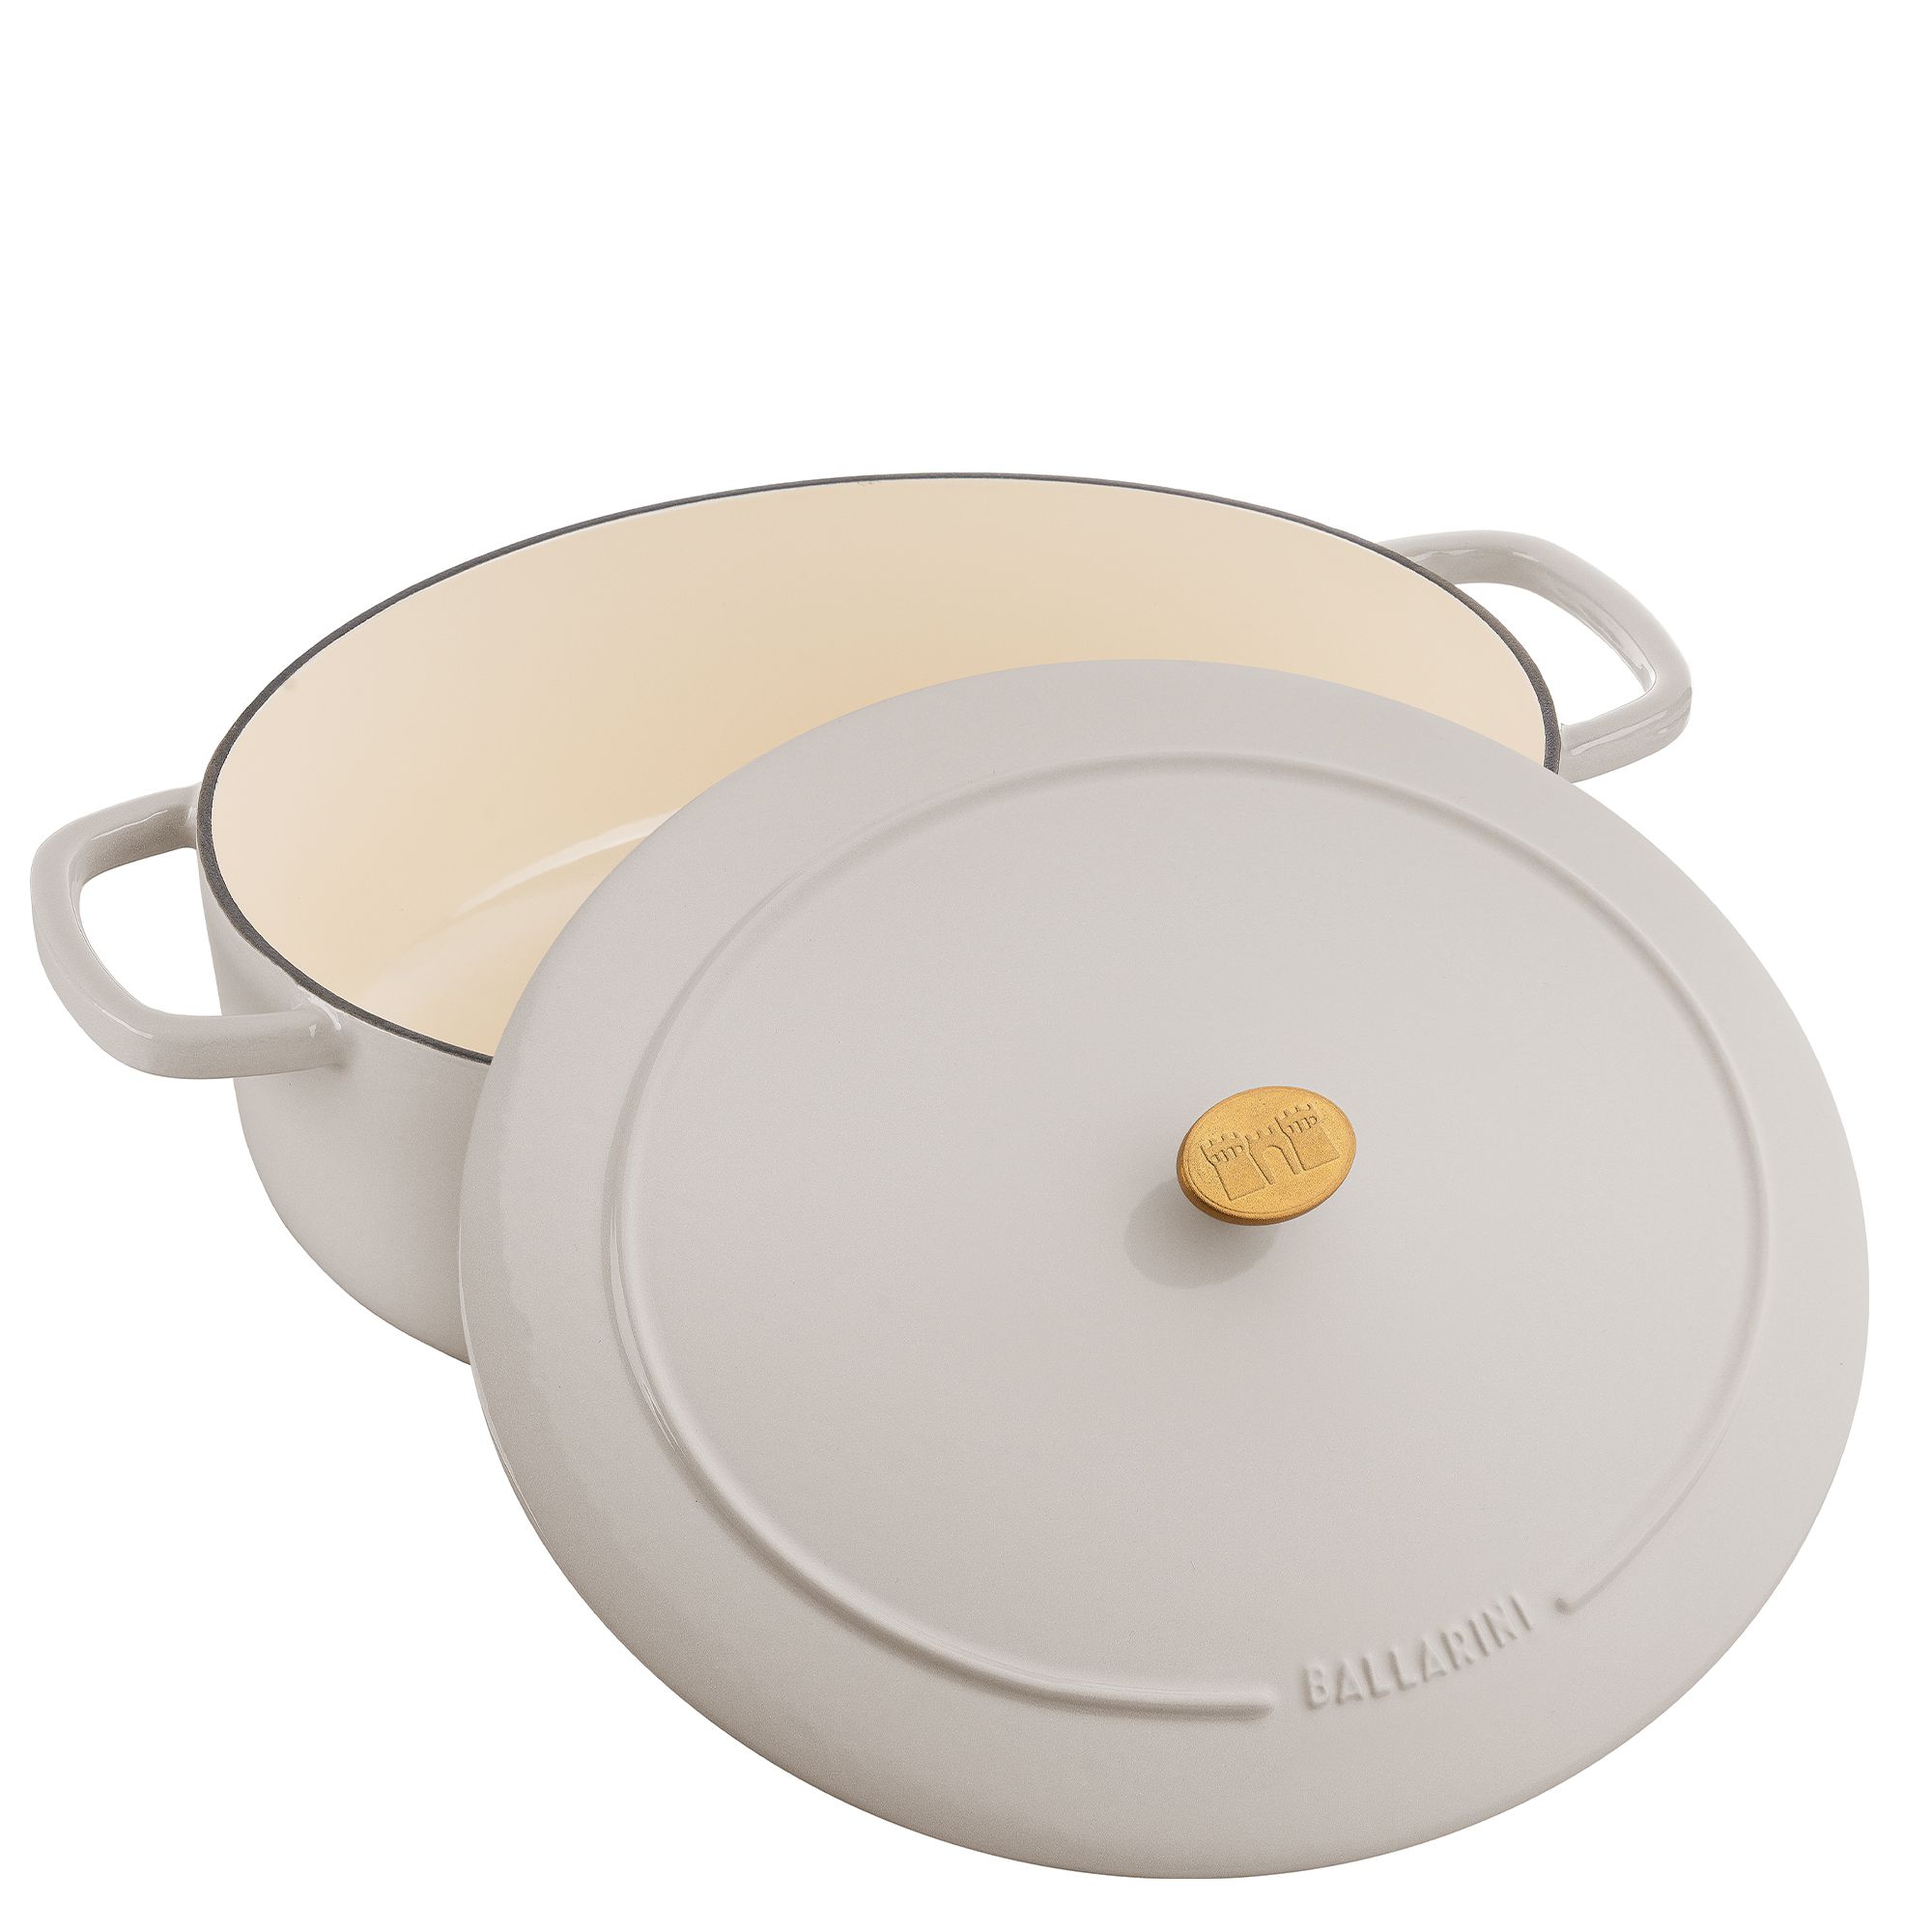 NEOFLAM FIKA 10 WOK for Stovetops and Induction